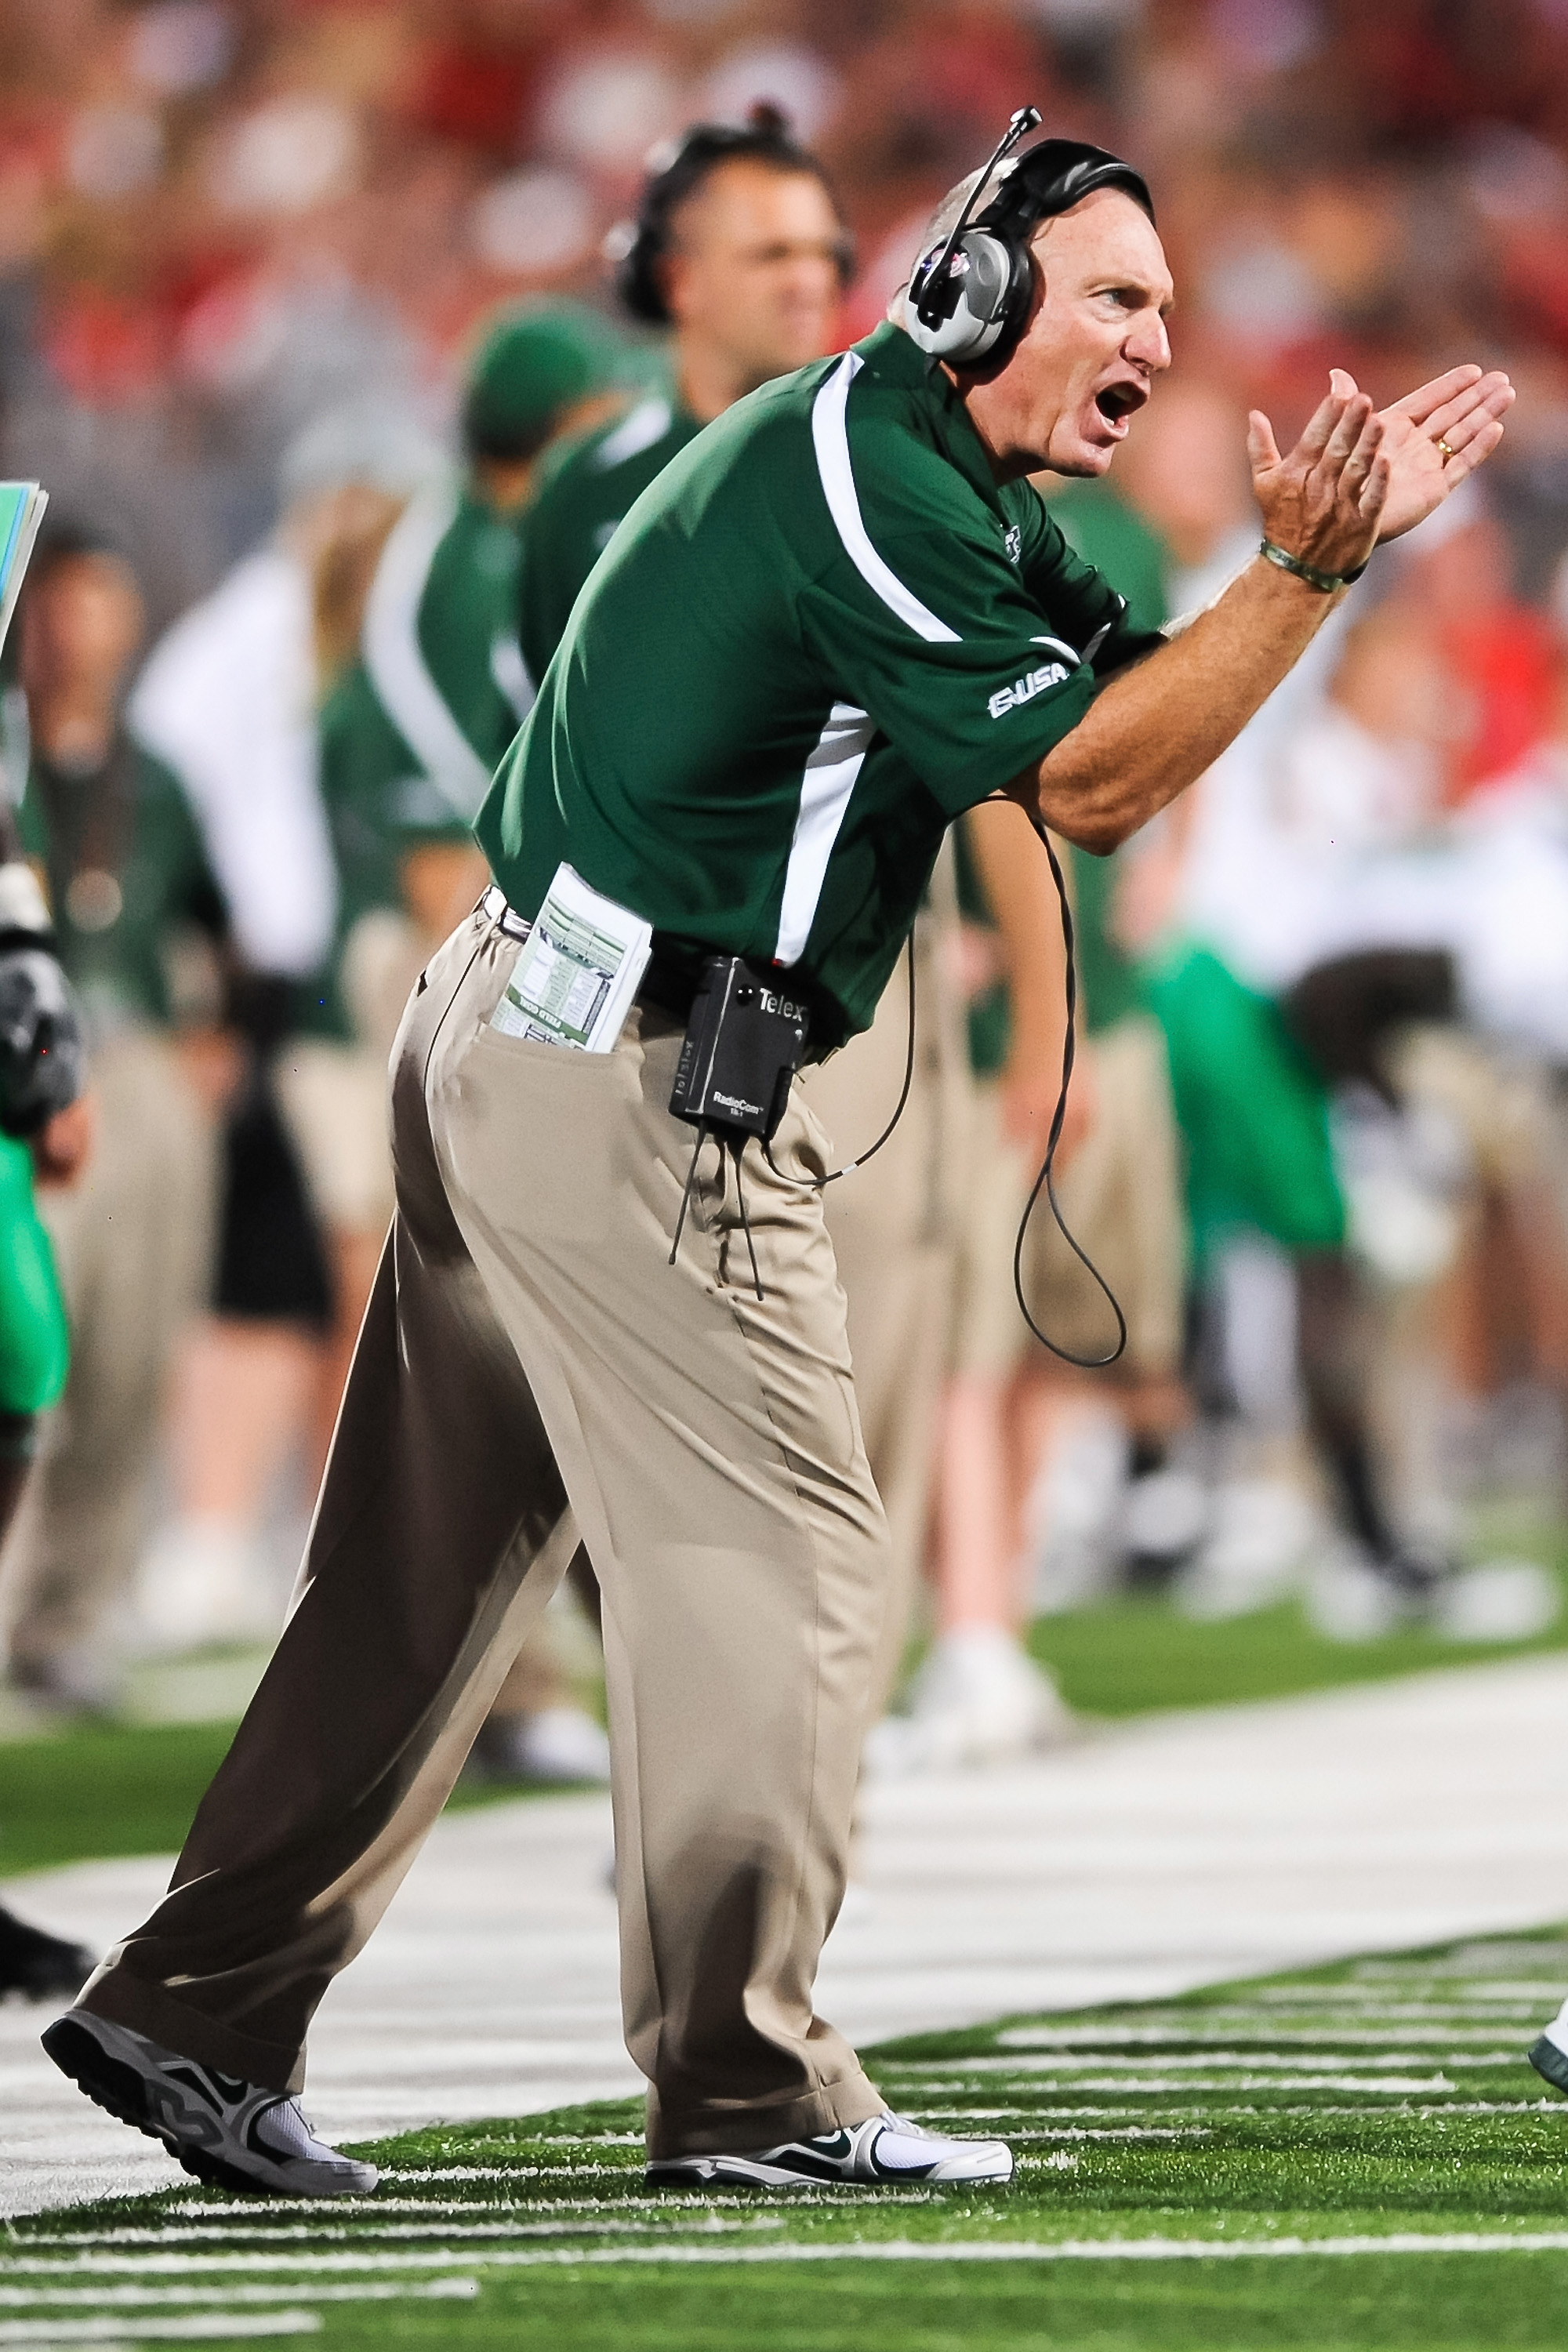 COLUMBUS, OH - SEPTEMBER 2: Head Coach Doc Holliday of the Marshall Thundering Herd encourages his team against the Ohio State Buckeyes at Ohio Stadium on September 2, 2010 in Columbus, Ohio. (Photo by Jamie Sabau/Getty Images)